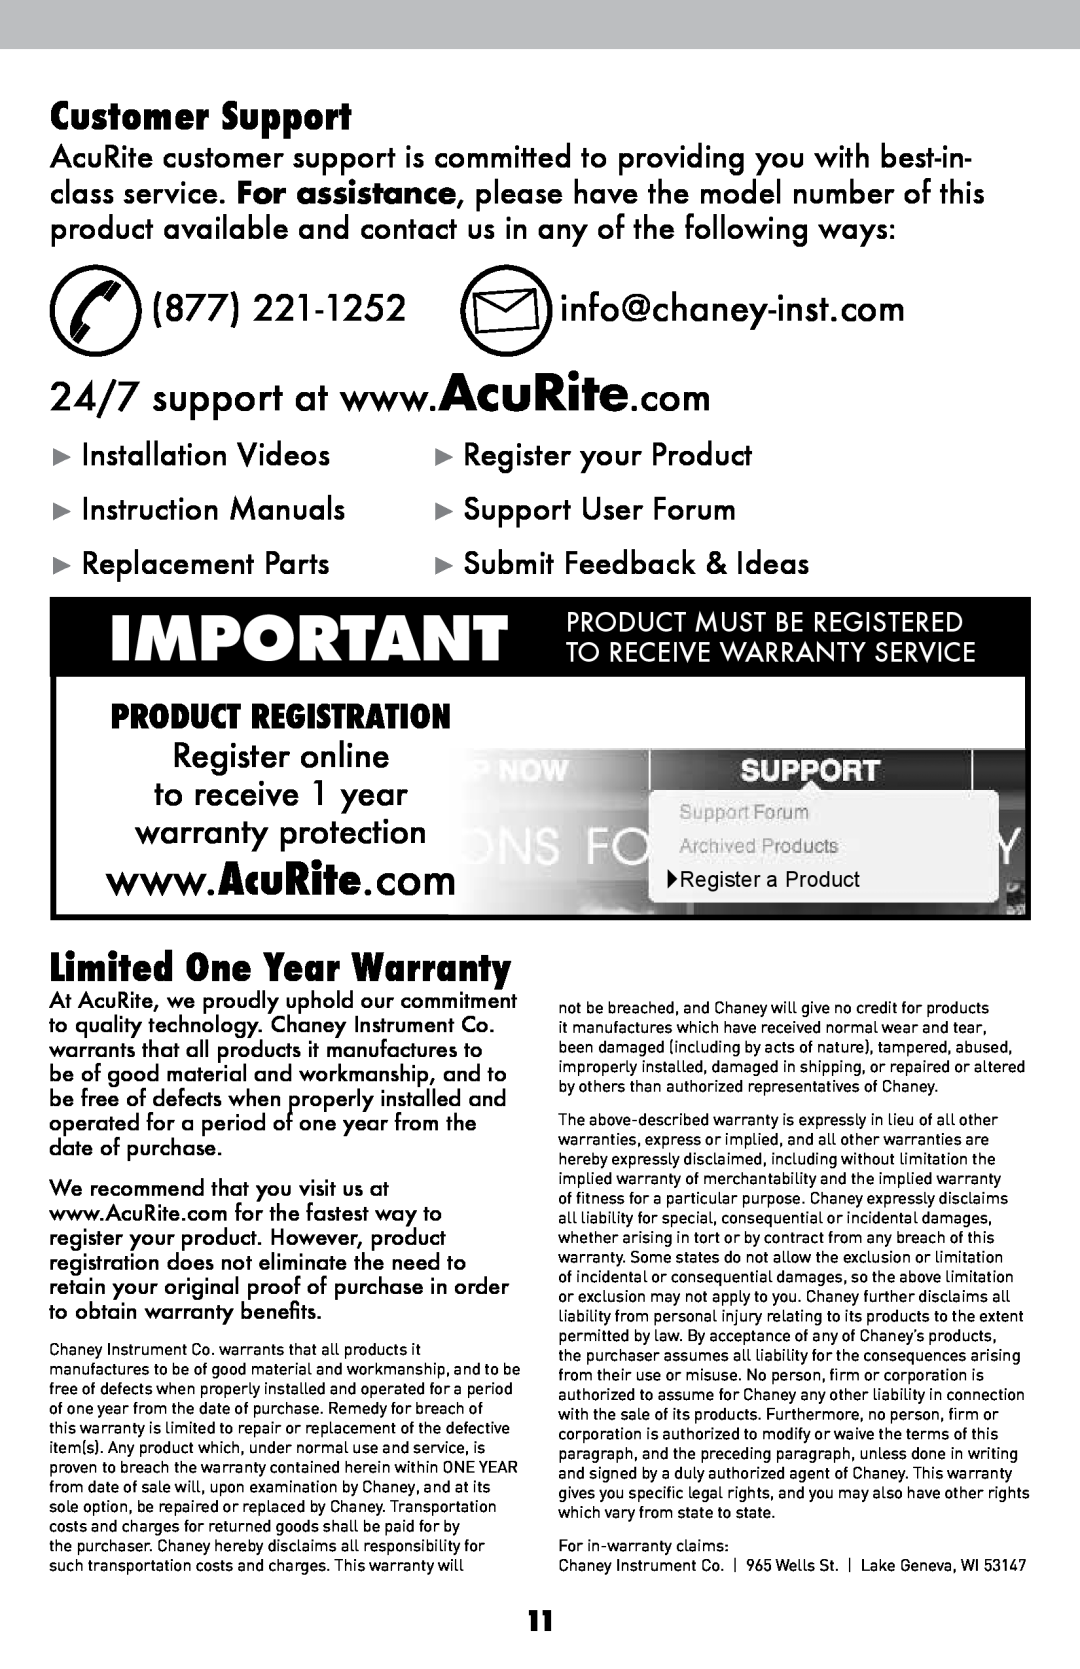 Acu-Rite 06016RM Customer Support, Limited One Year Warranty, 877 221-1252 info@chaney-inst.com, Register online 